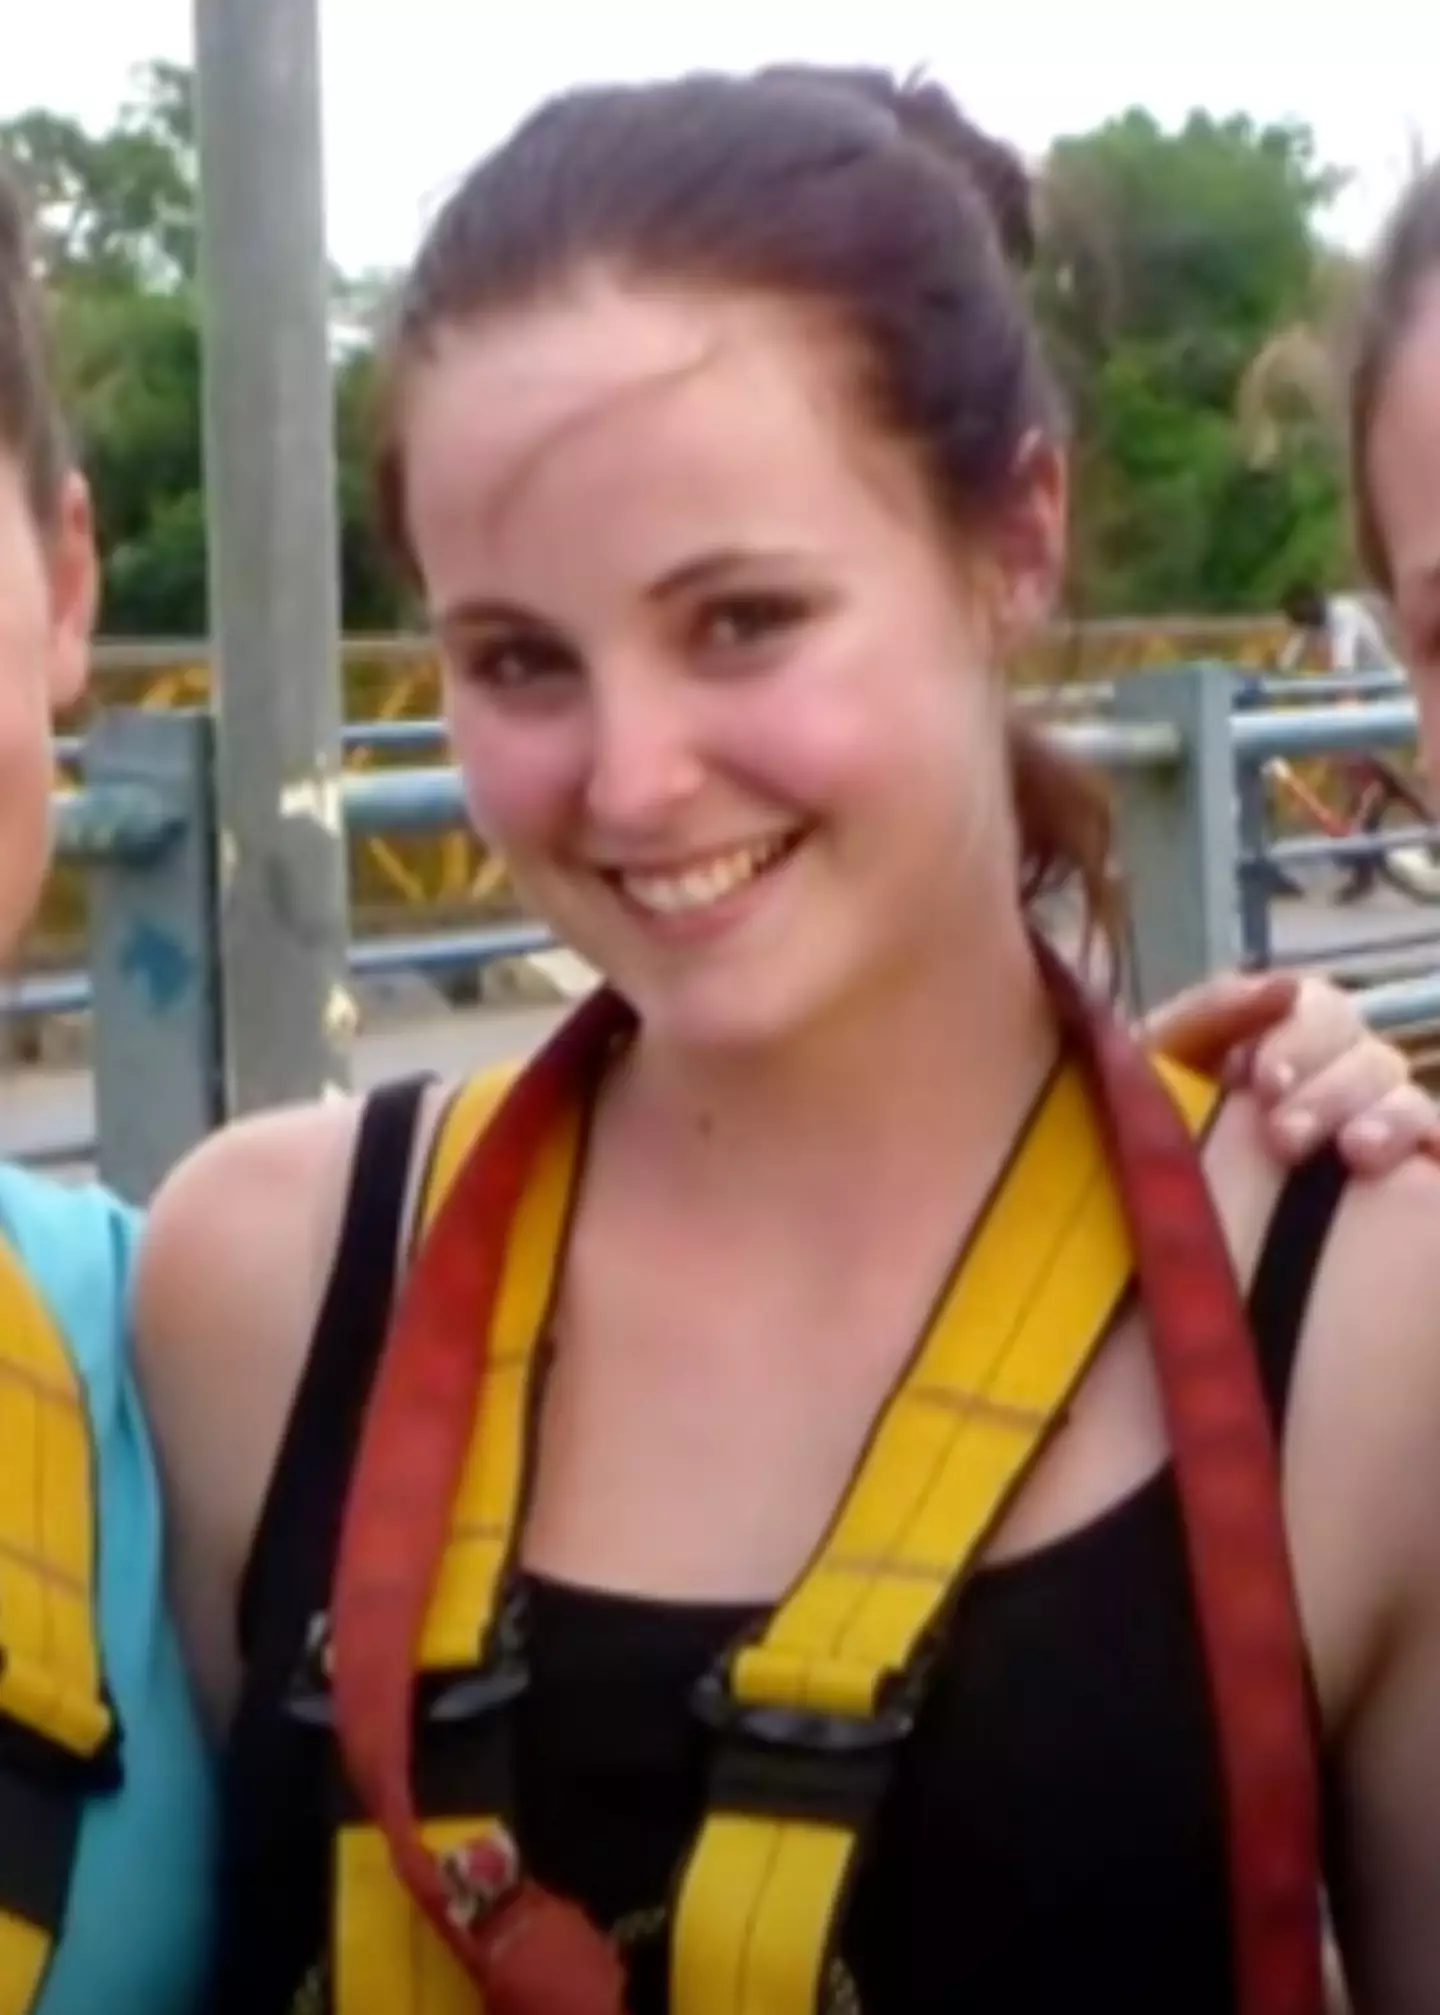 Erin fell 360 feet after her bungee cord snapped.